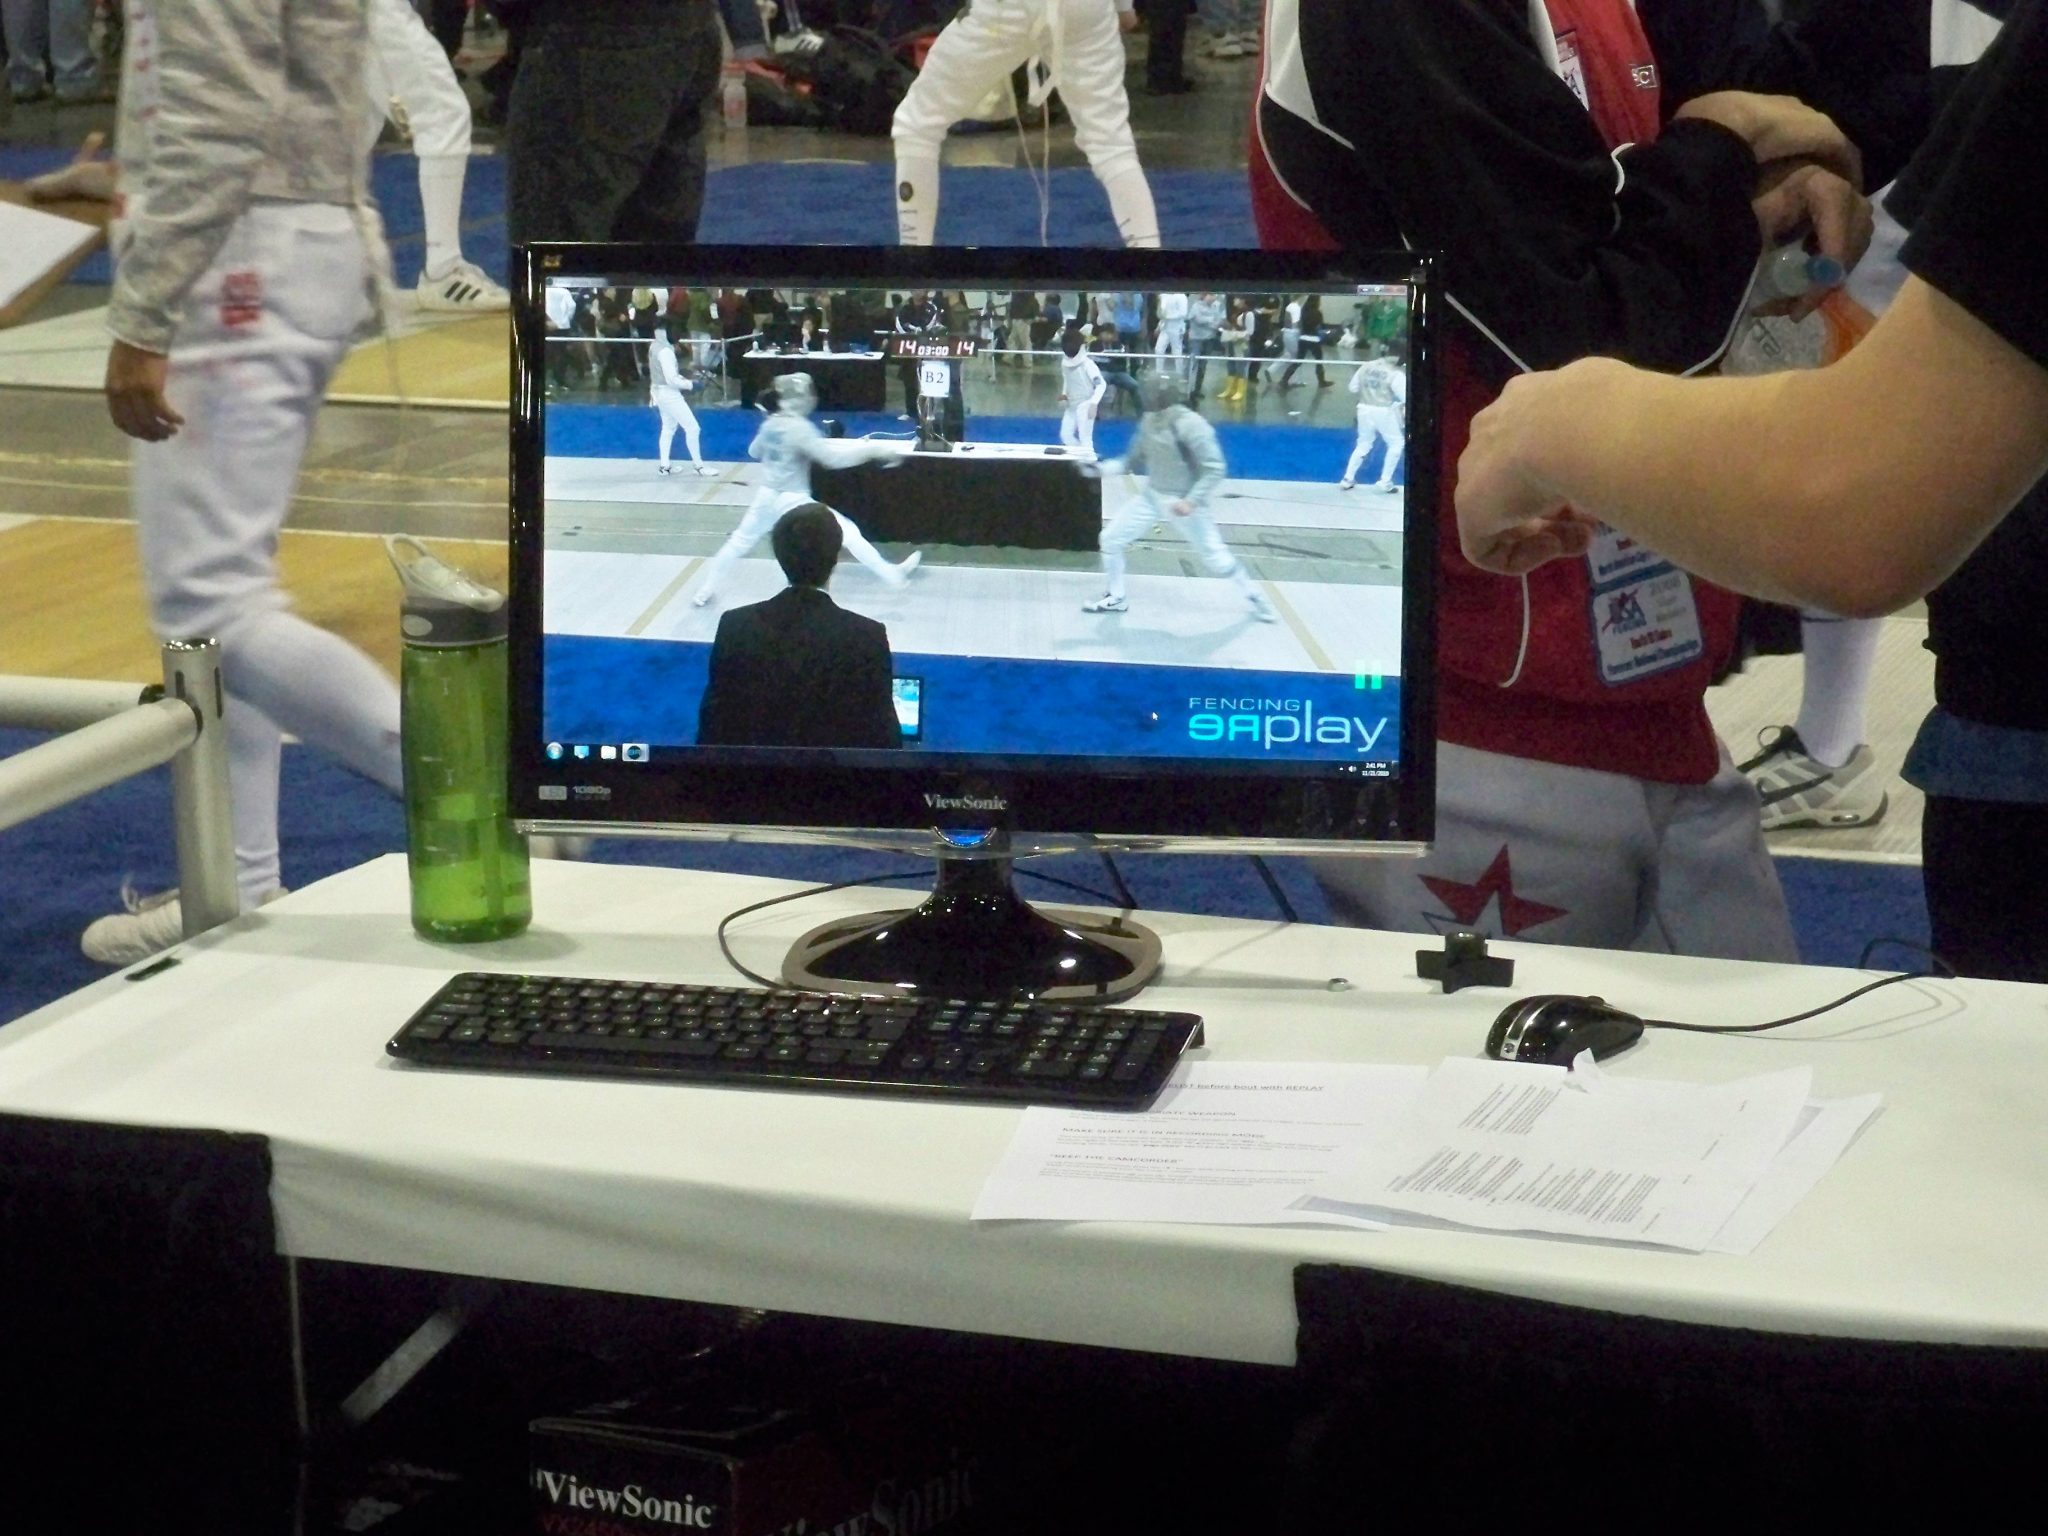 Fencing Video replay system in use at US Fencing events